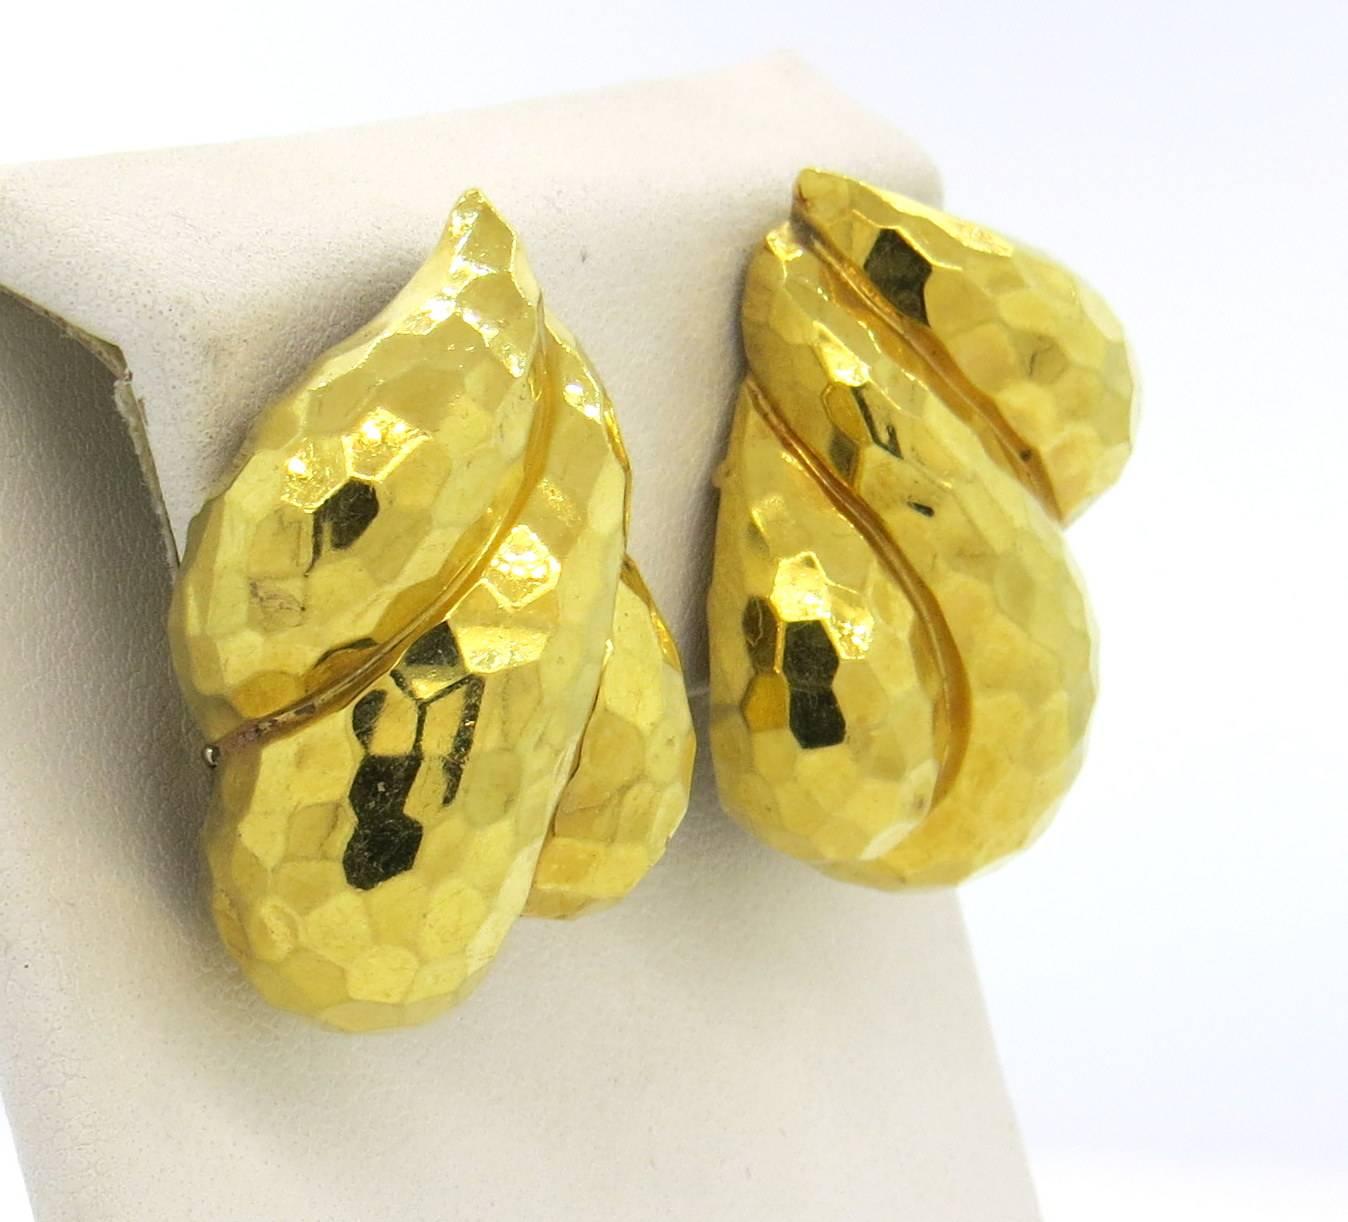 Large pair of 18k hammered yellow gold earrings, crafted by Henry Dunay. Earrings measure 33mm x 25mm. Marked: Dunay, 18k, 63197. Weight - 33.6 grams 